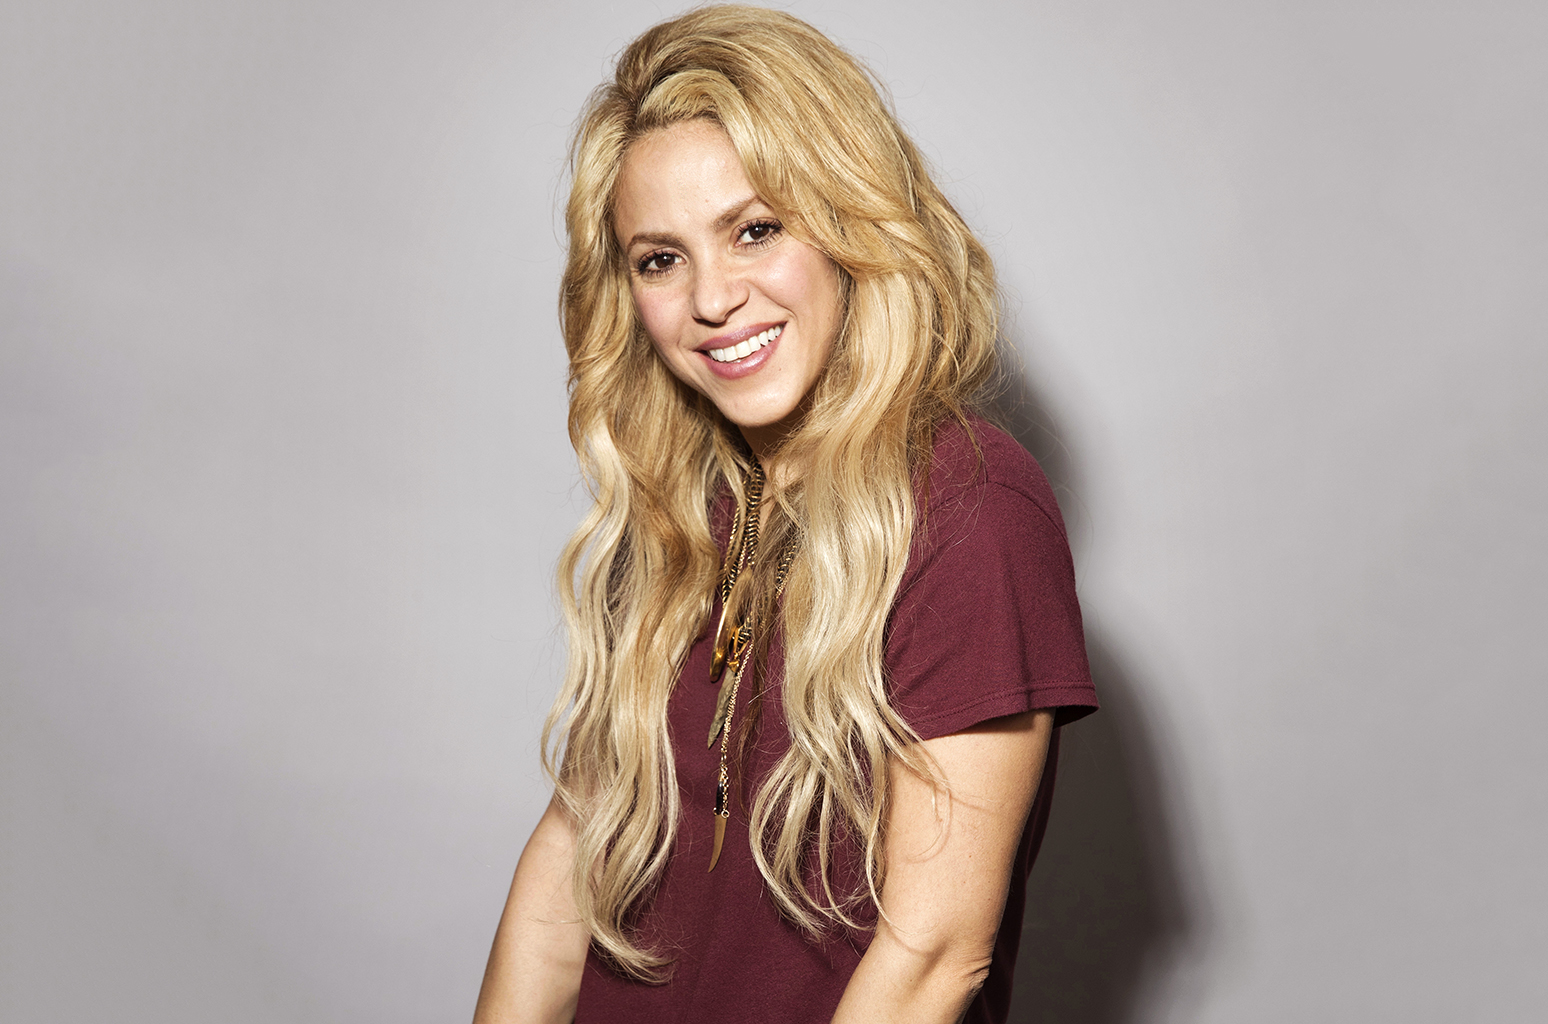 In this May 16, 2017 photo, Colombian performer Shakira poses for a portrait in New York to promote her 11th album “El Dorado”. (Photo by Victoria WIll/Invision/AP)